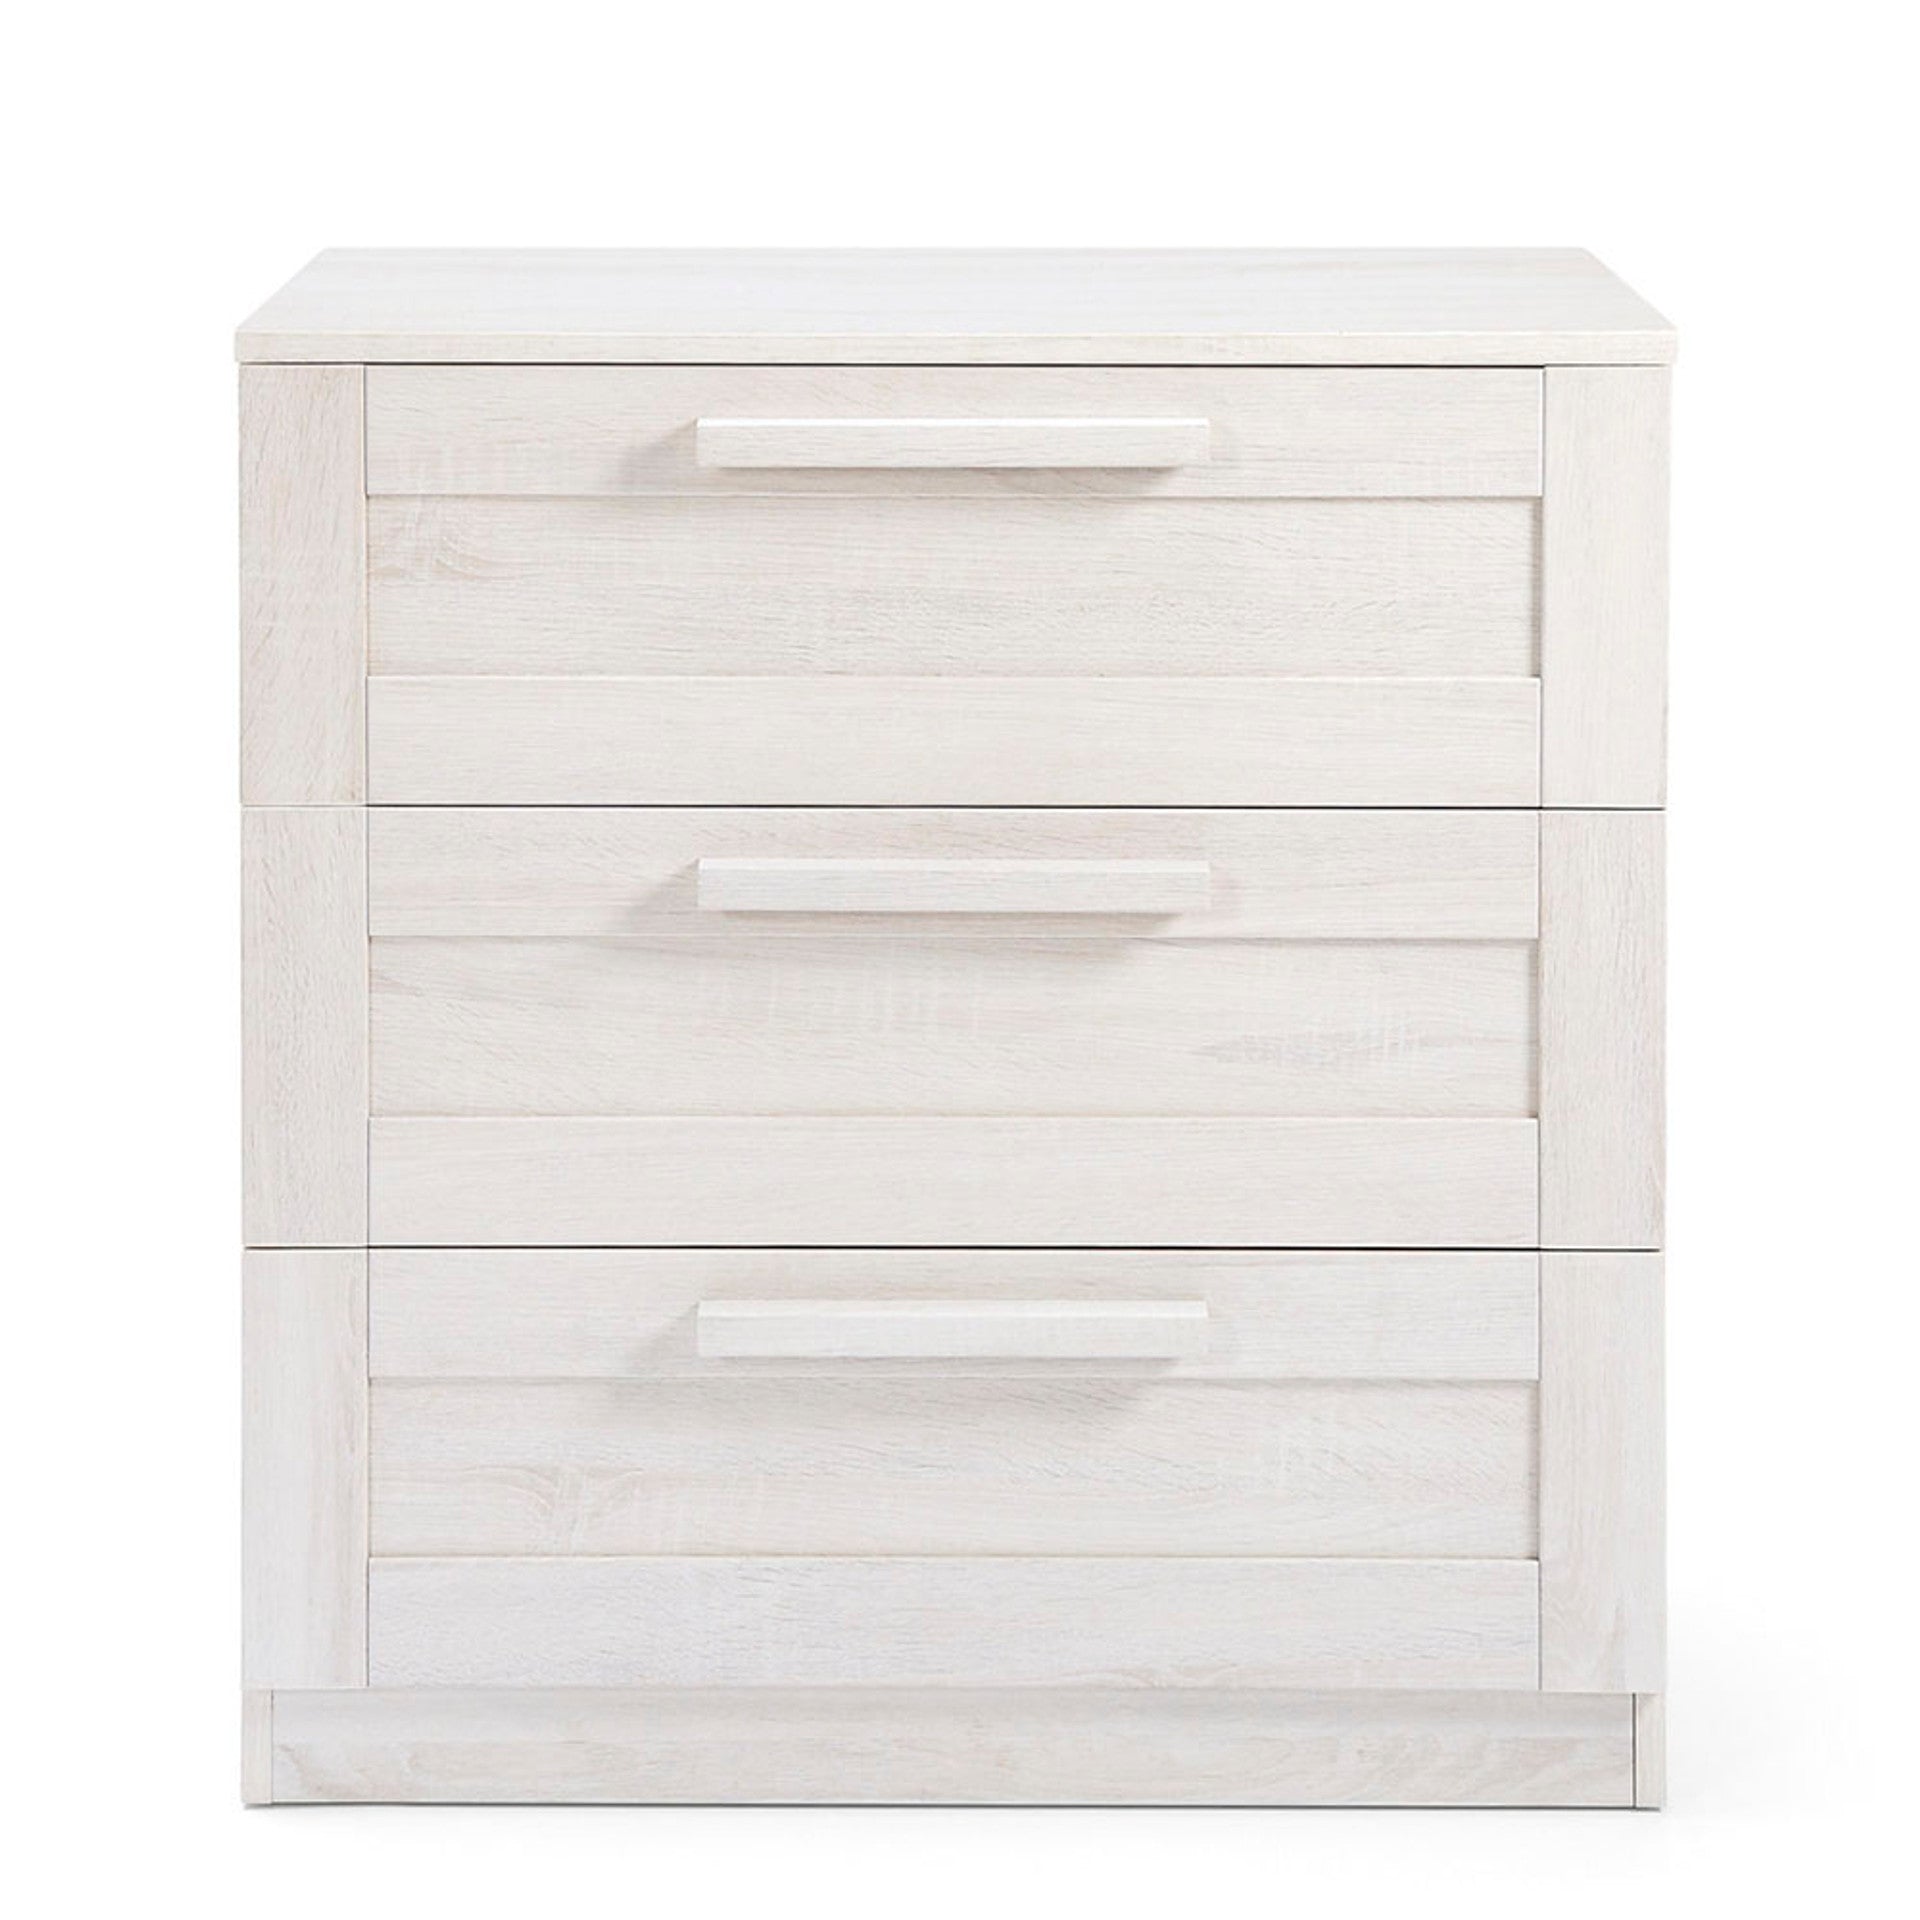 Mamas & Papas Atlas Cot Bed & Dresser - Nimbus White - Instore Collection Only